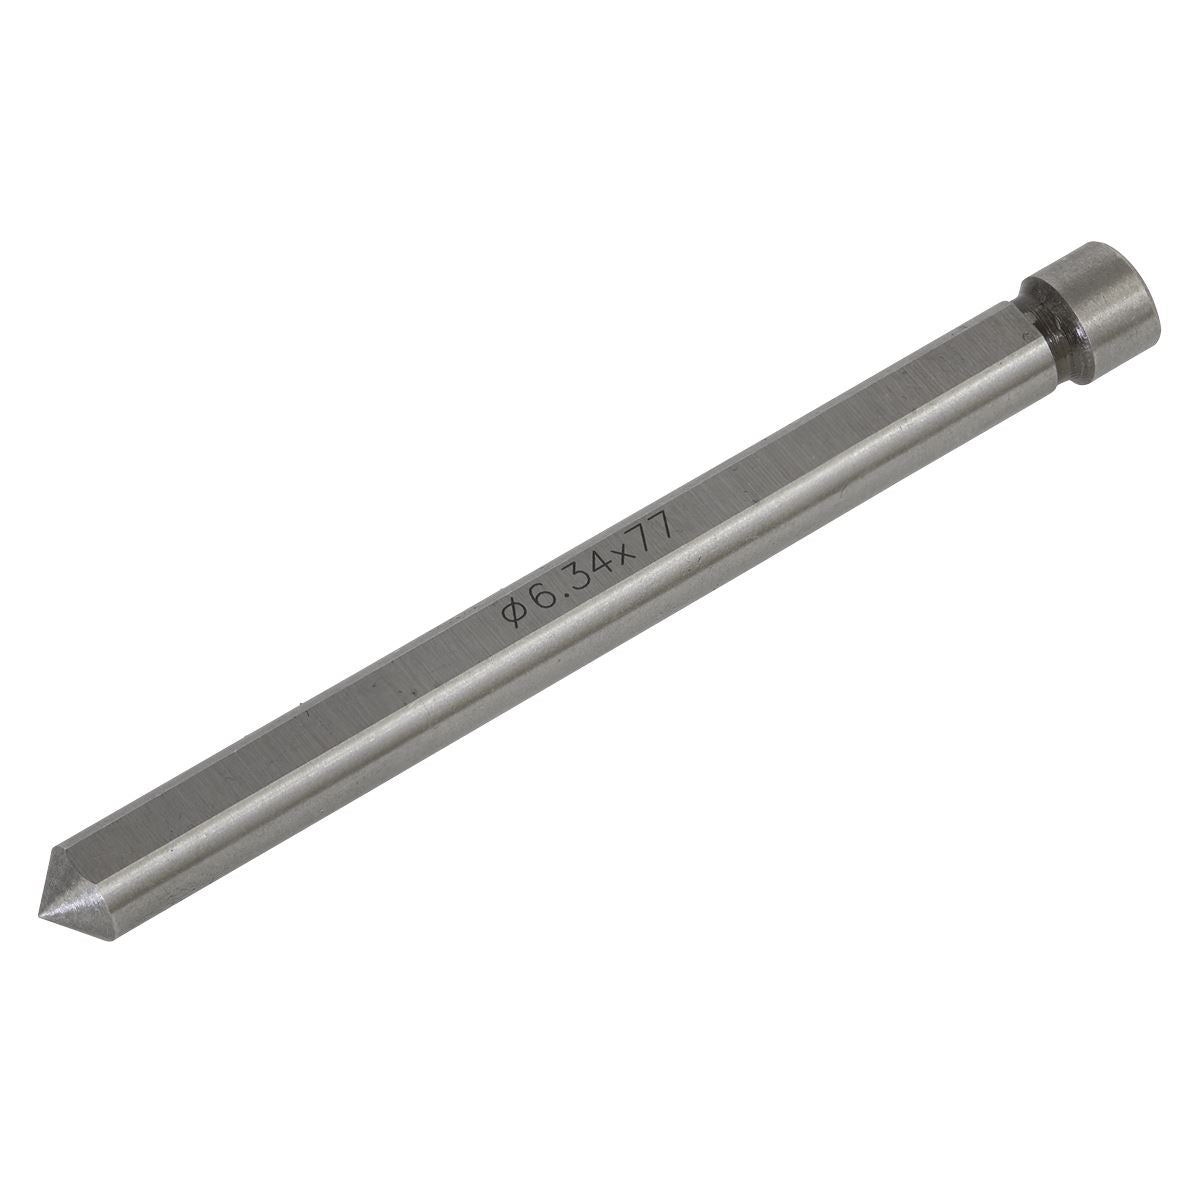 Worksafe by Sealey Short Straight Pin Pilot Rod 77mm